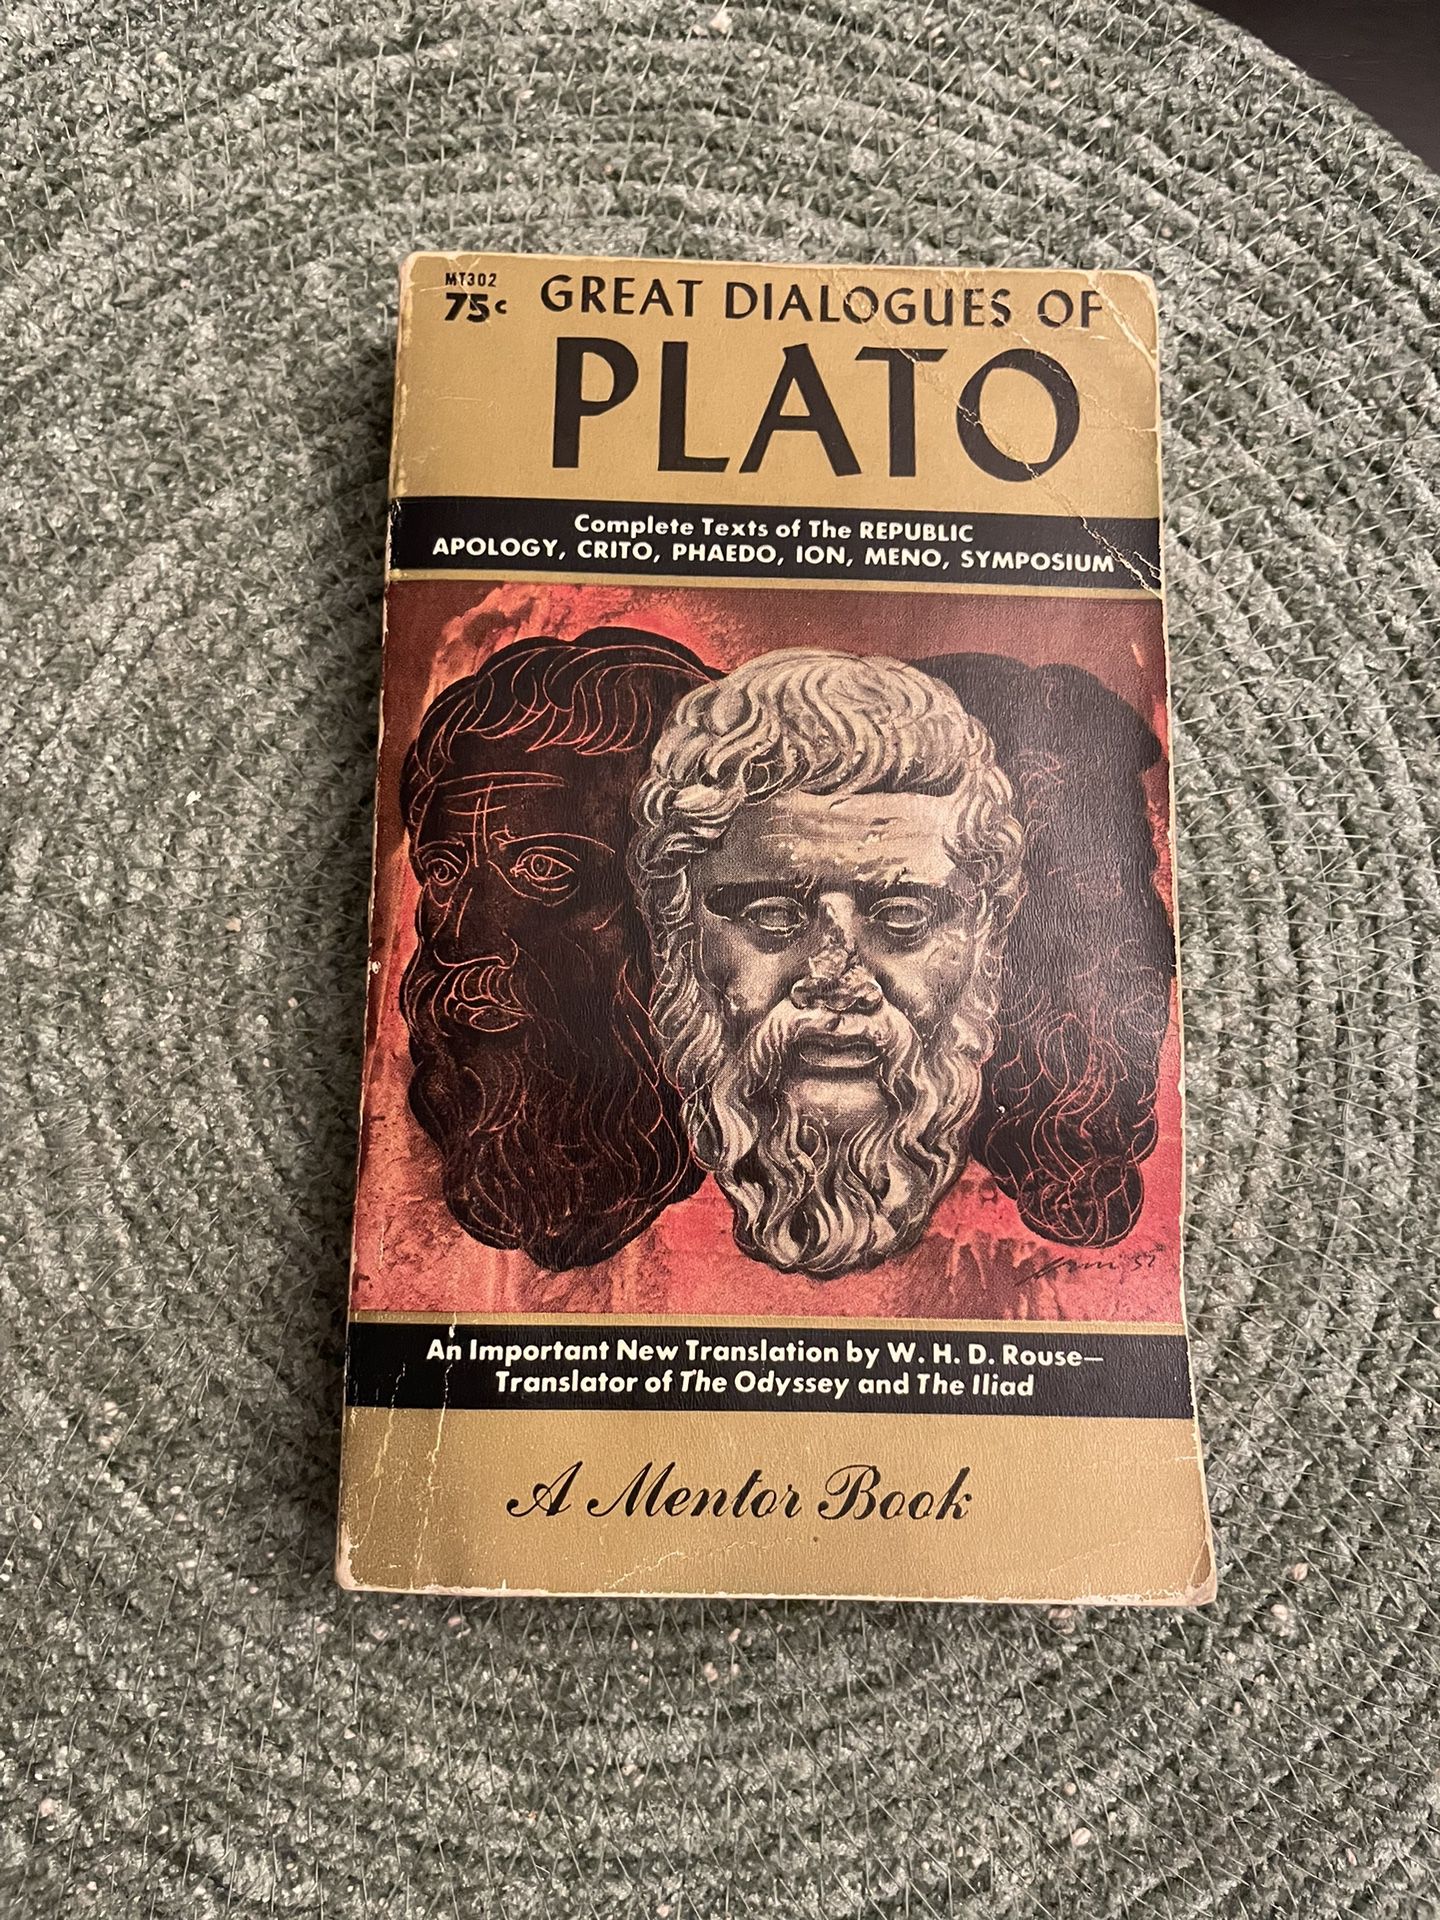 The Great Dialogues Of Plato 1961